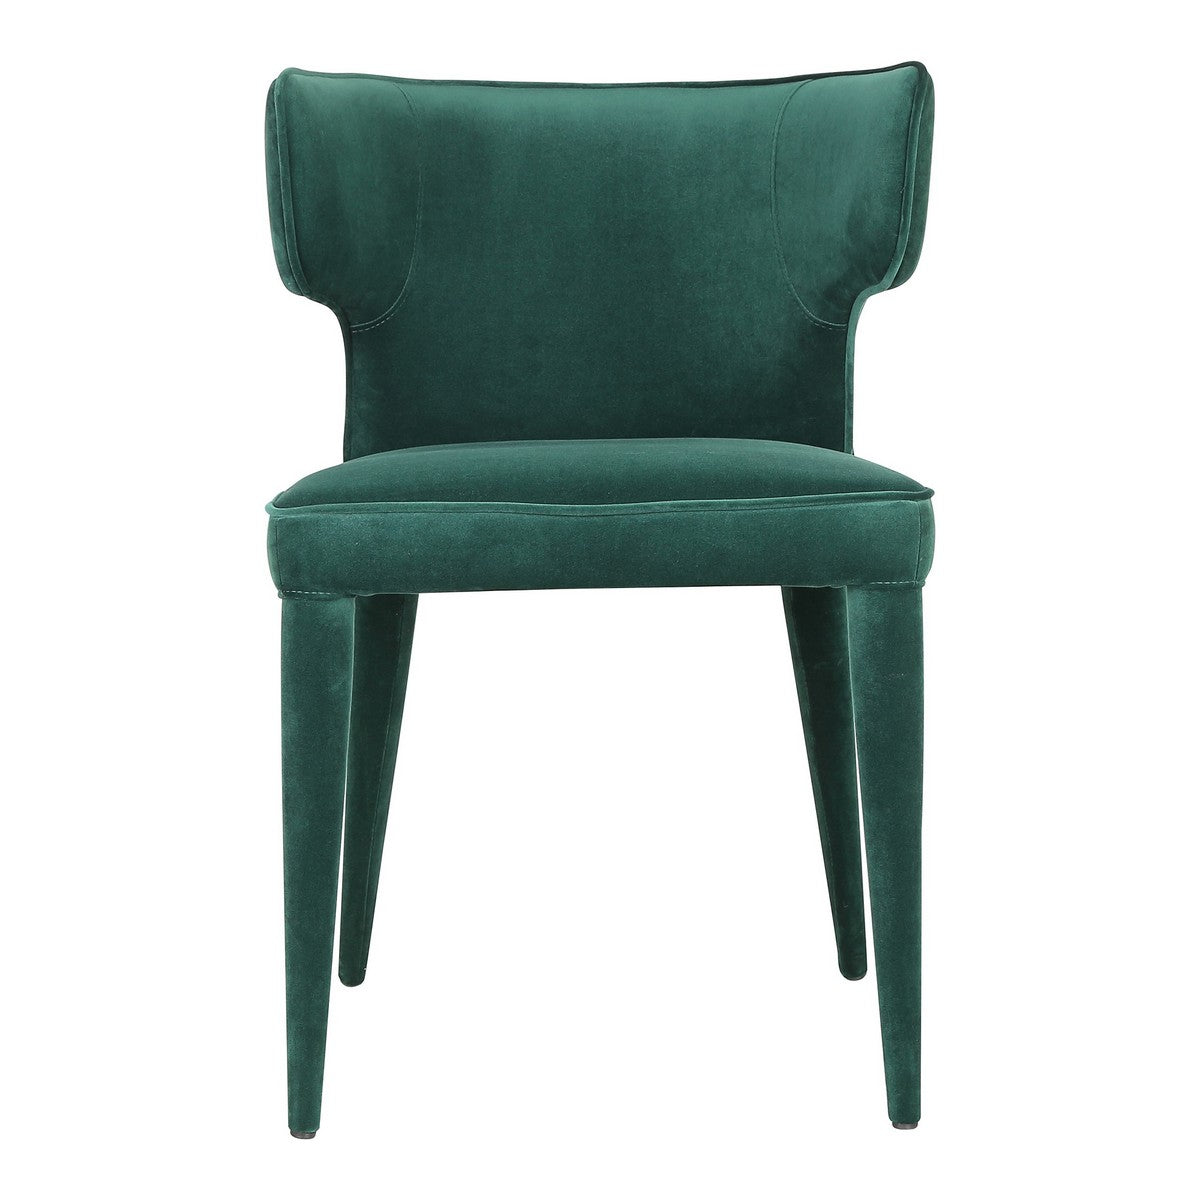 Moe's Home Collection Jennaya Dining Chair Green - EH-1103-16 - Moe's Home Collection - Dining Chairs - Minimal And Modern - 1